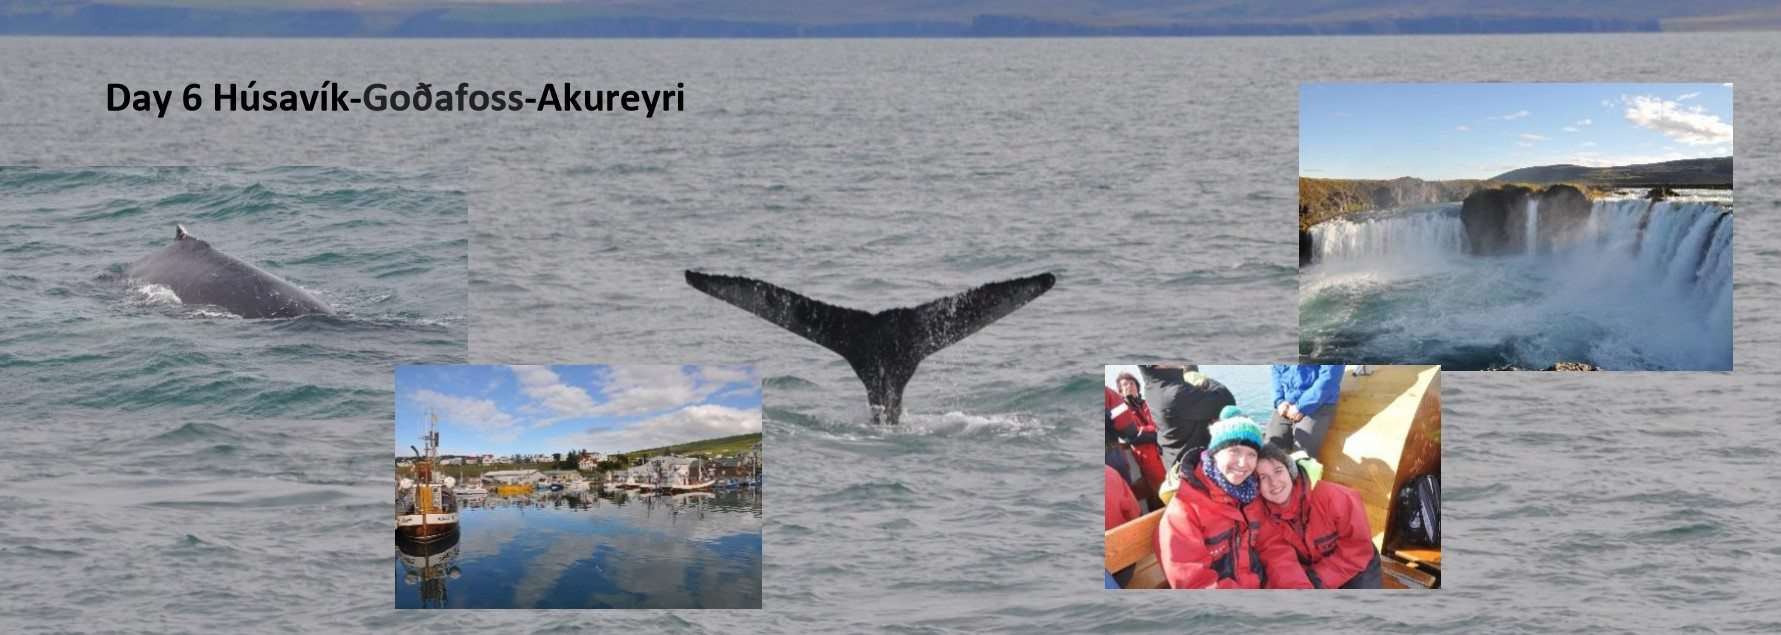 North Iceland Whale watching